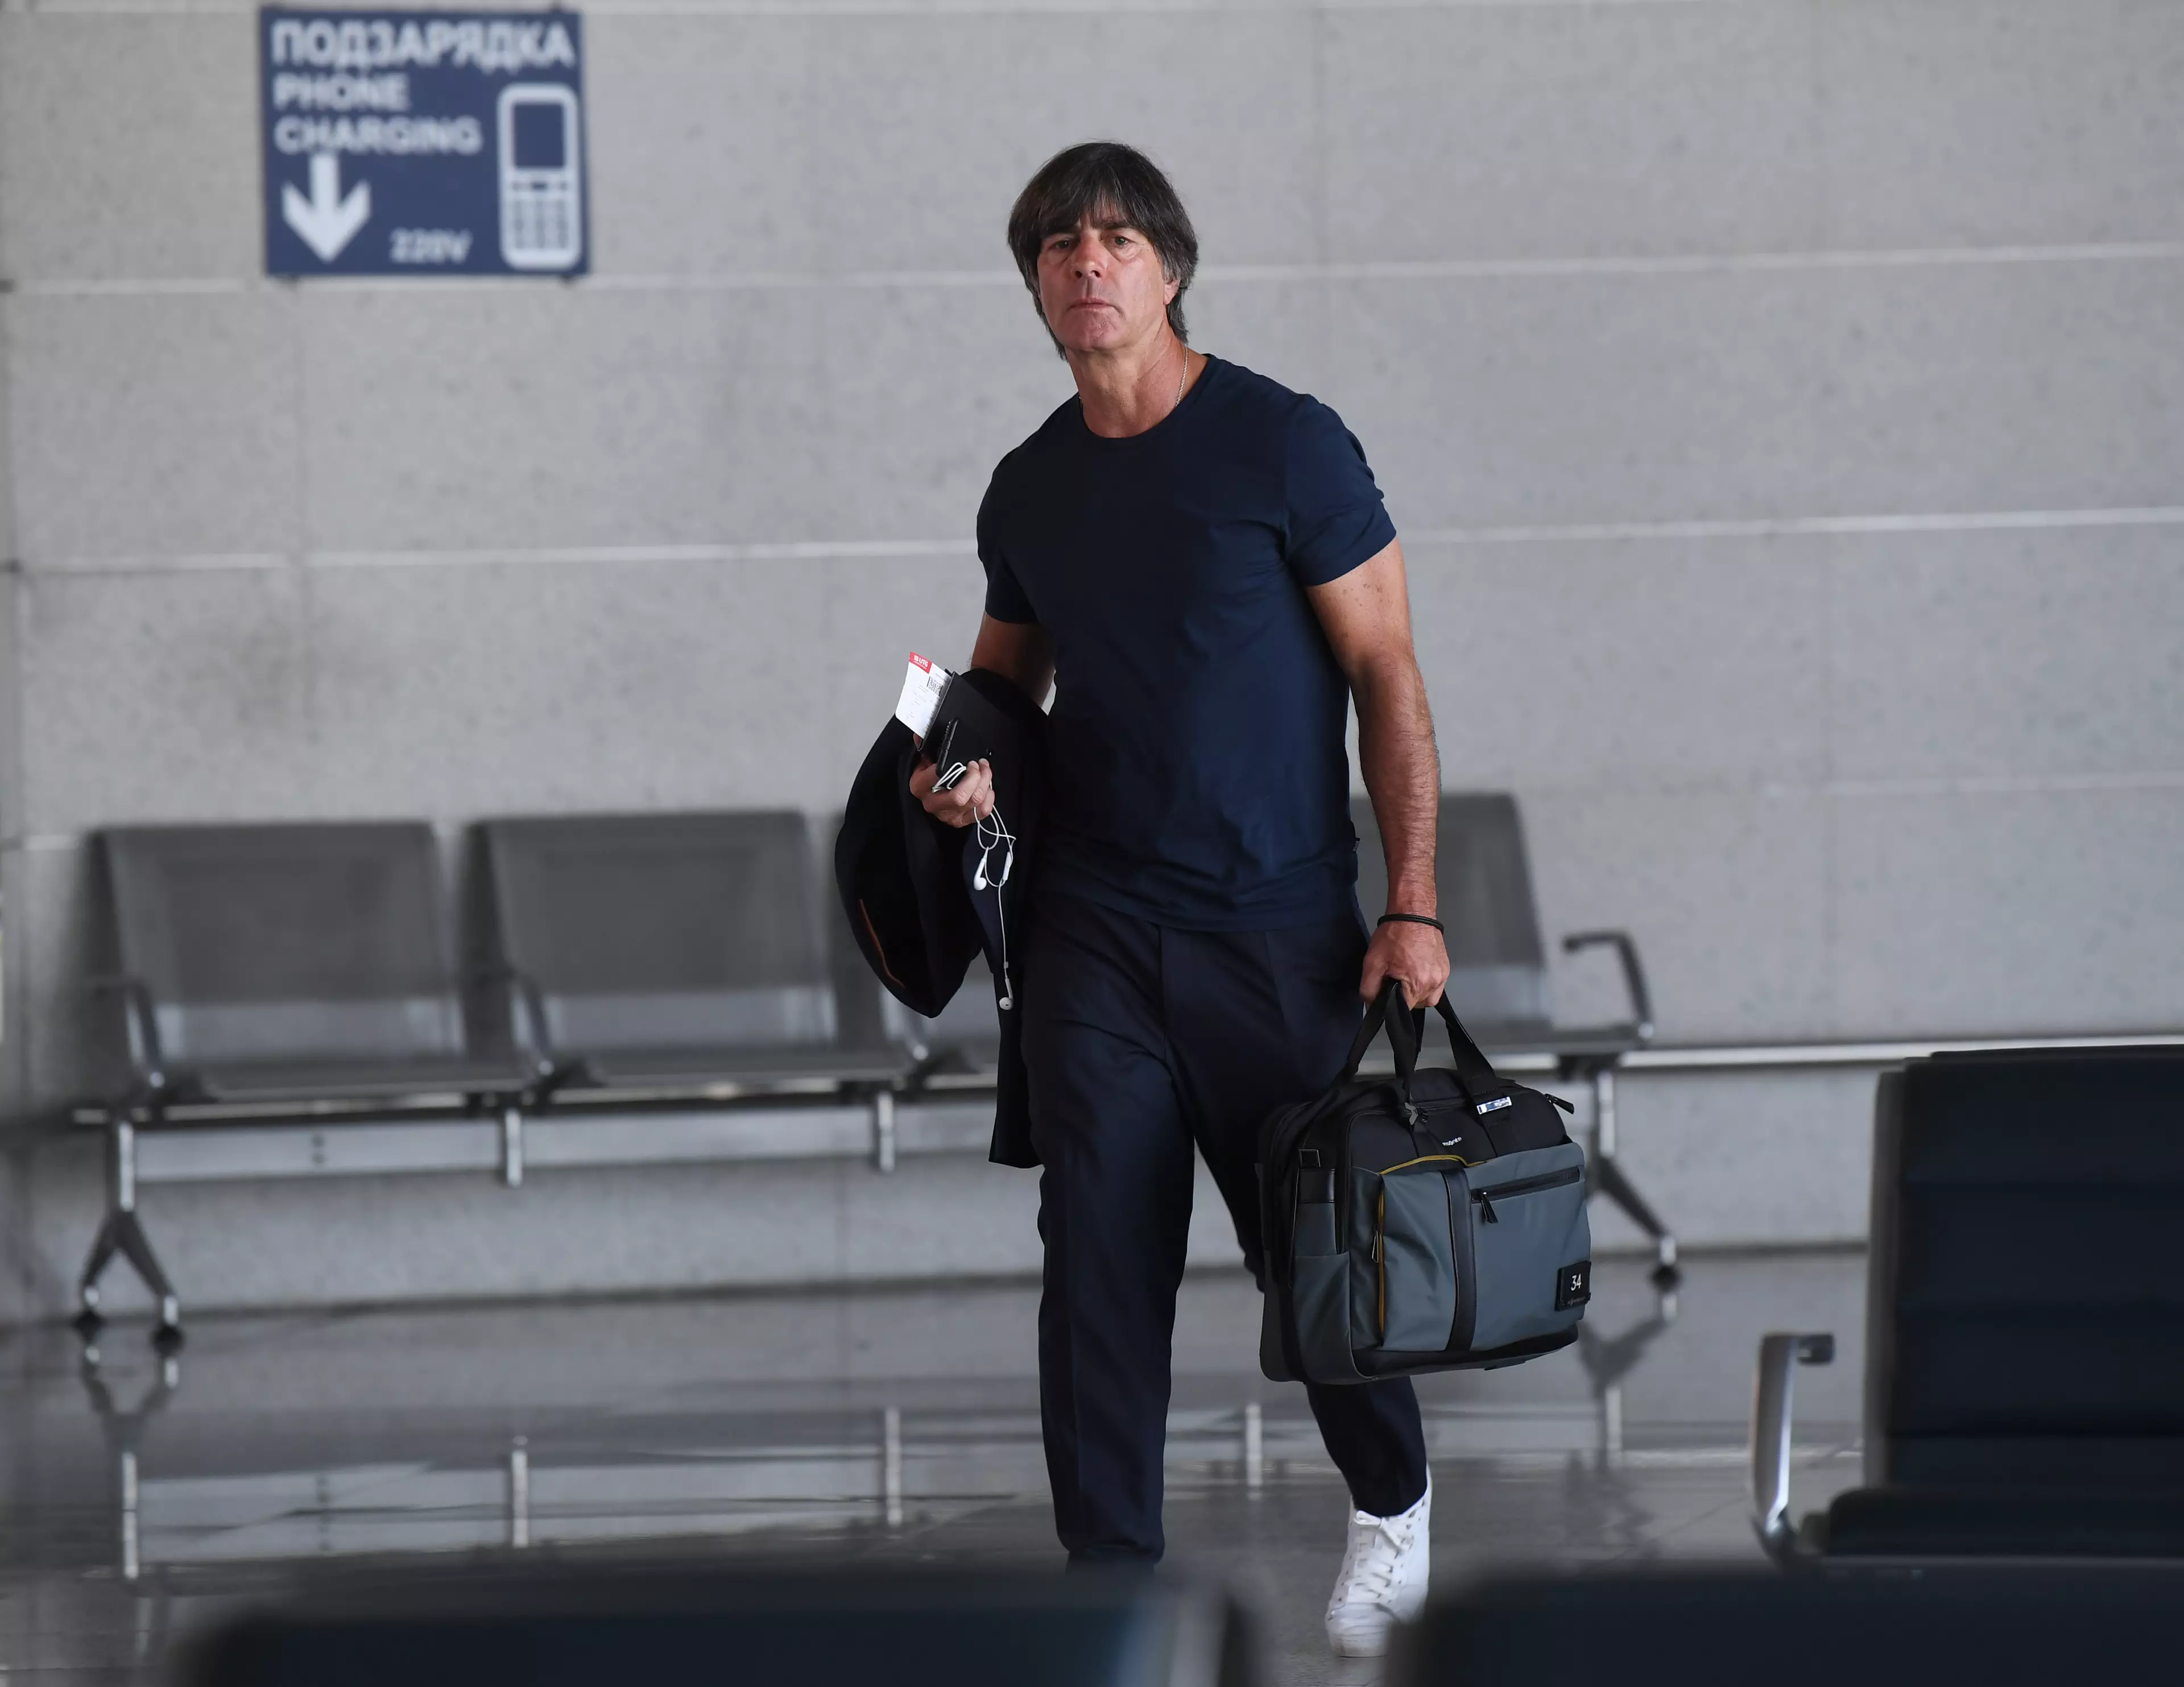 Coach Joachim Loew heads home after his team's defeat (